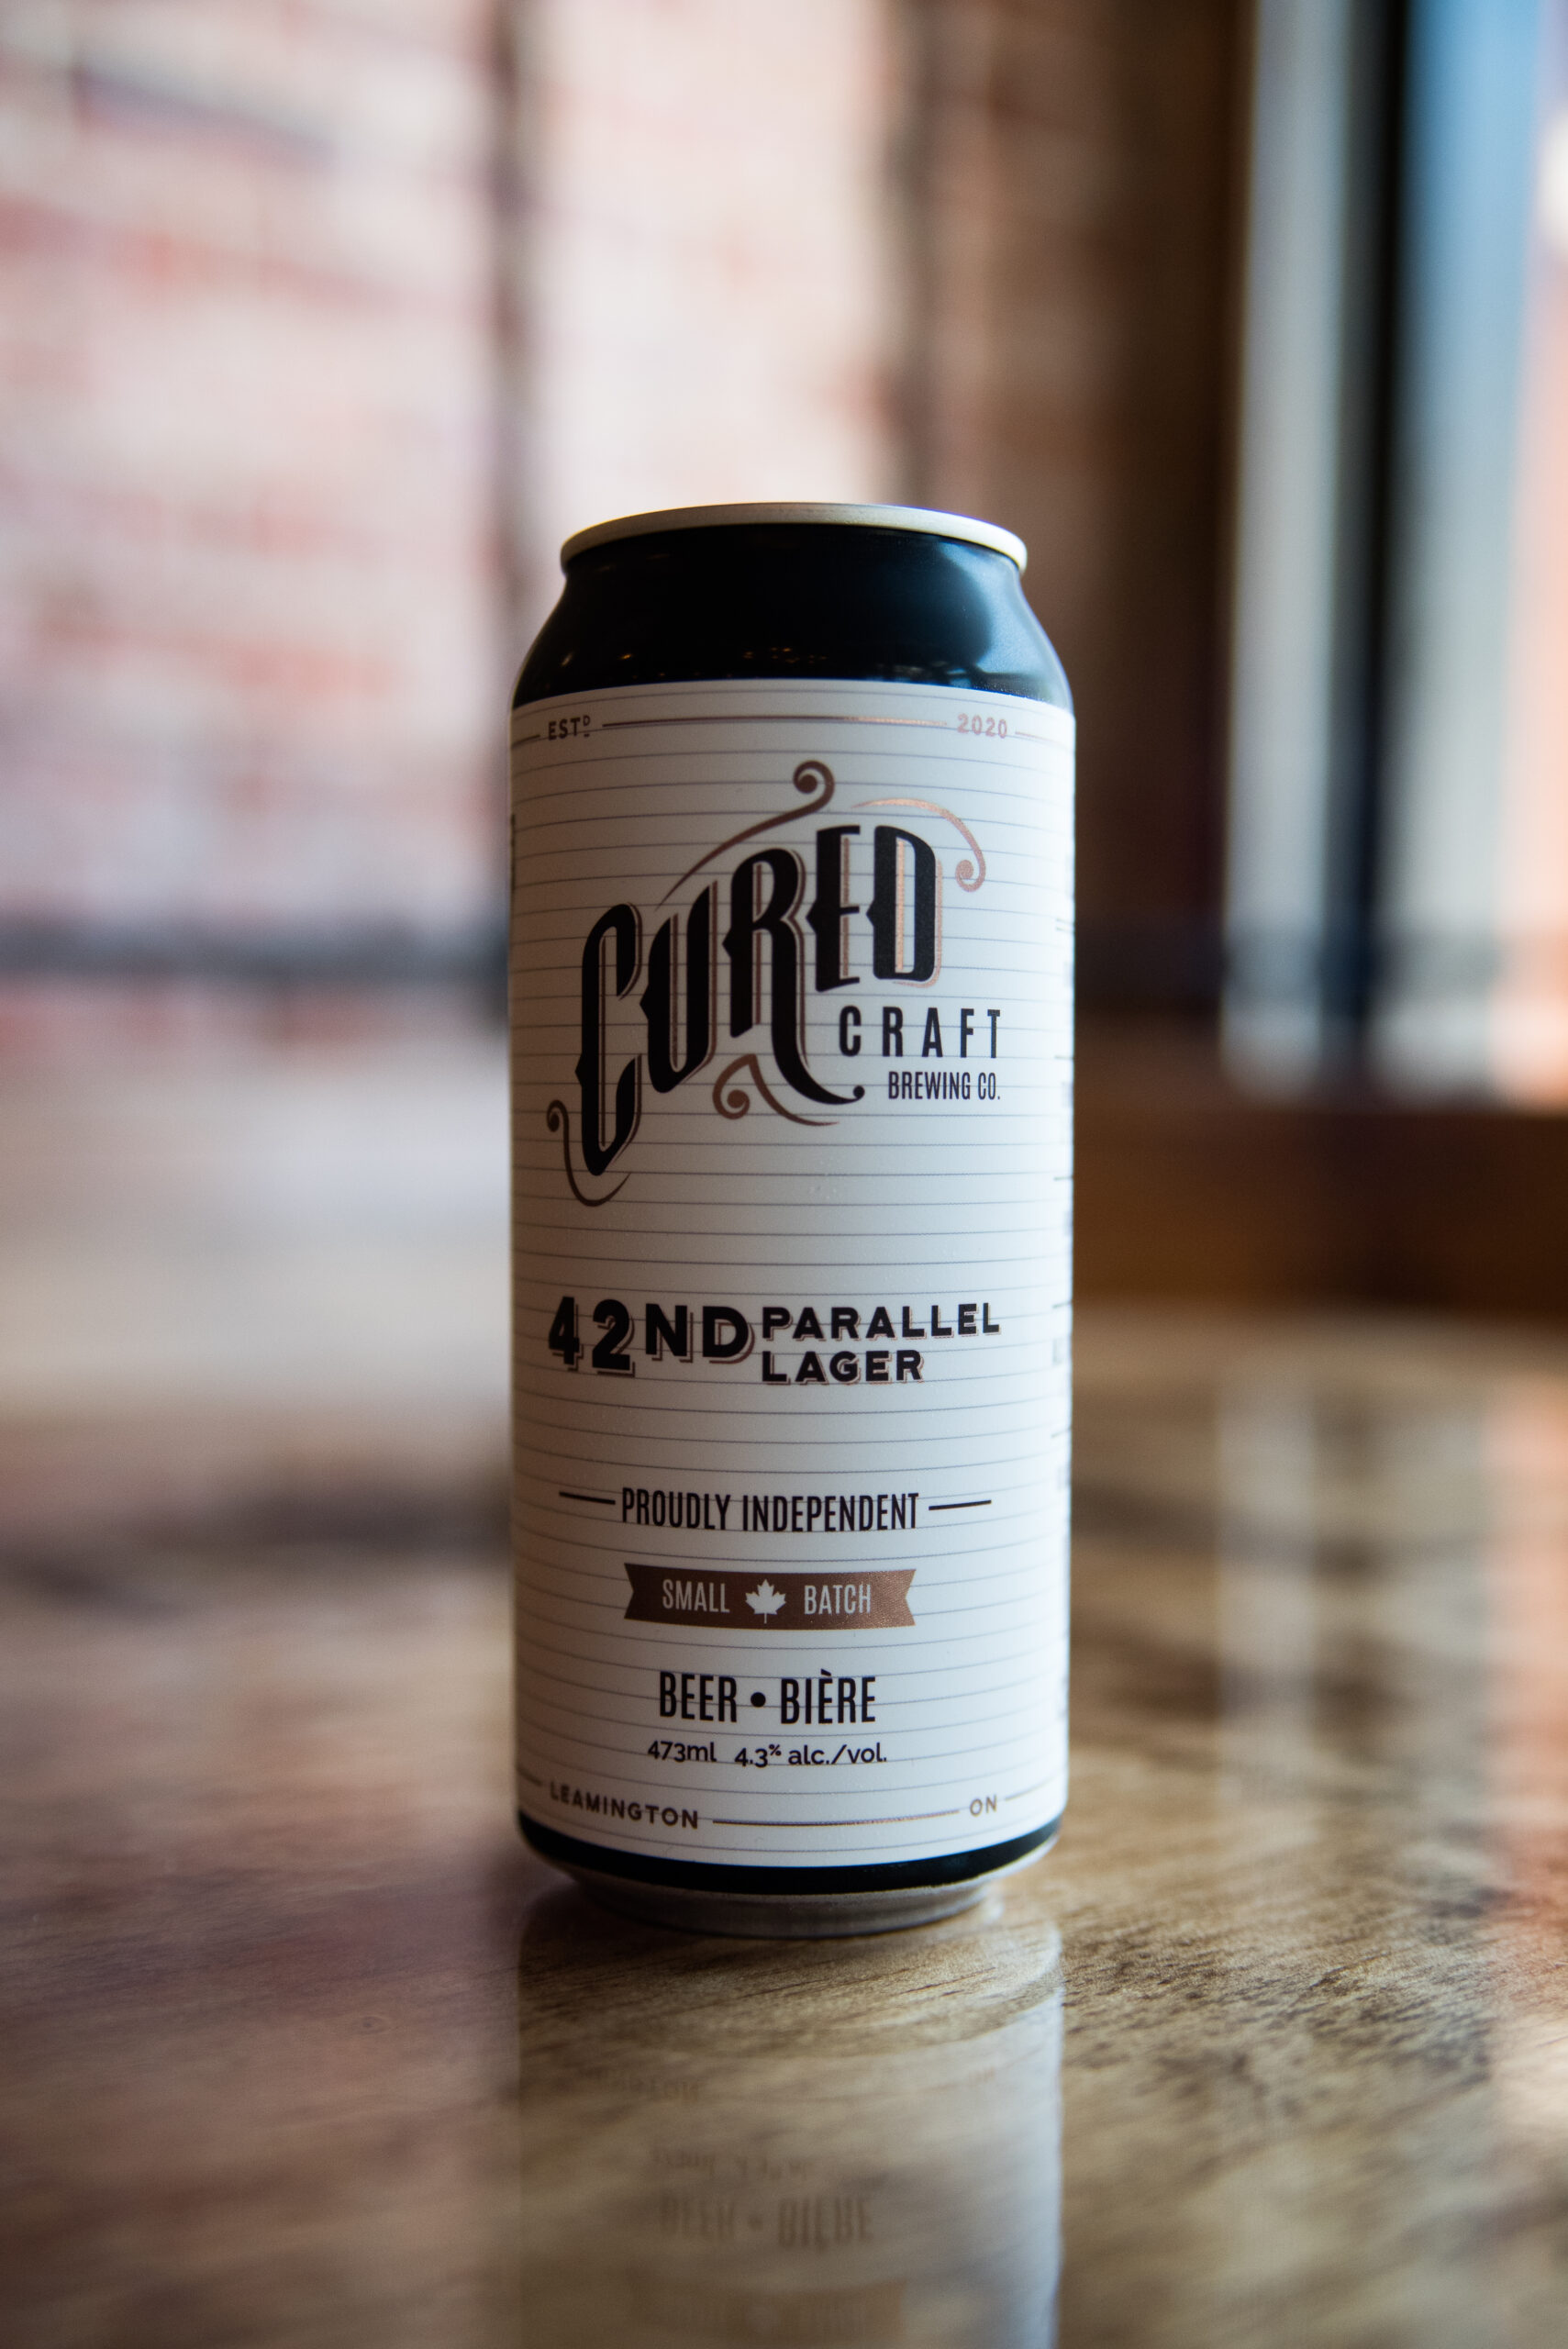 42nd Parallel Lager from Cured Craft Brewing Co. in Leamington, Ontario.